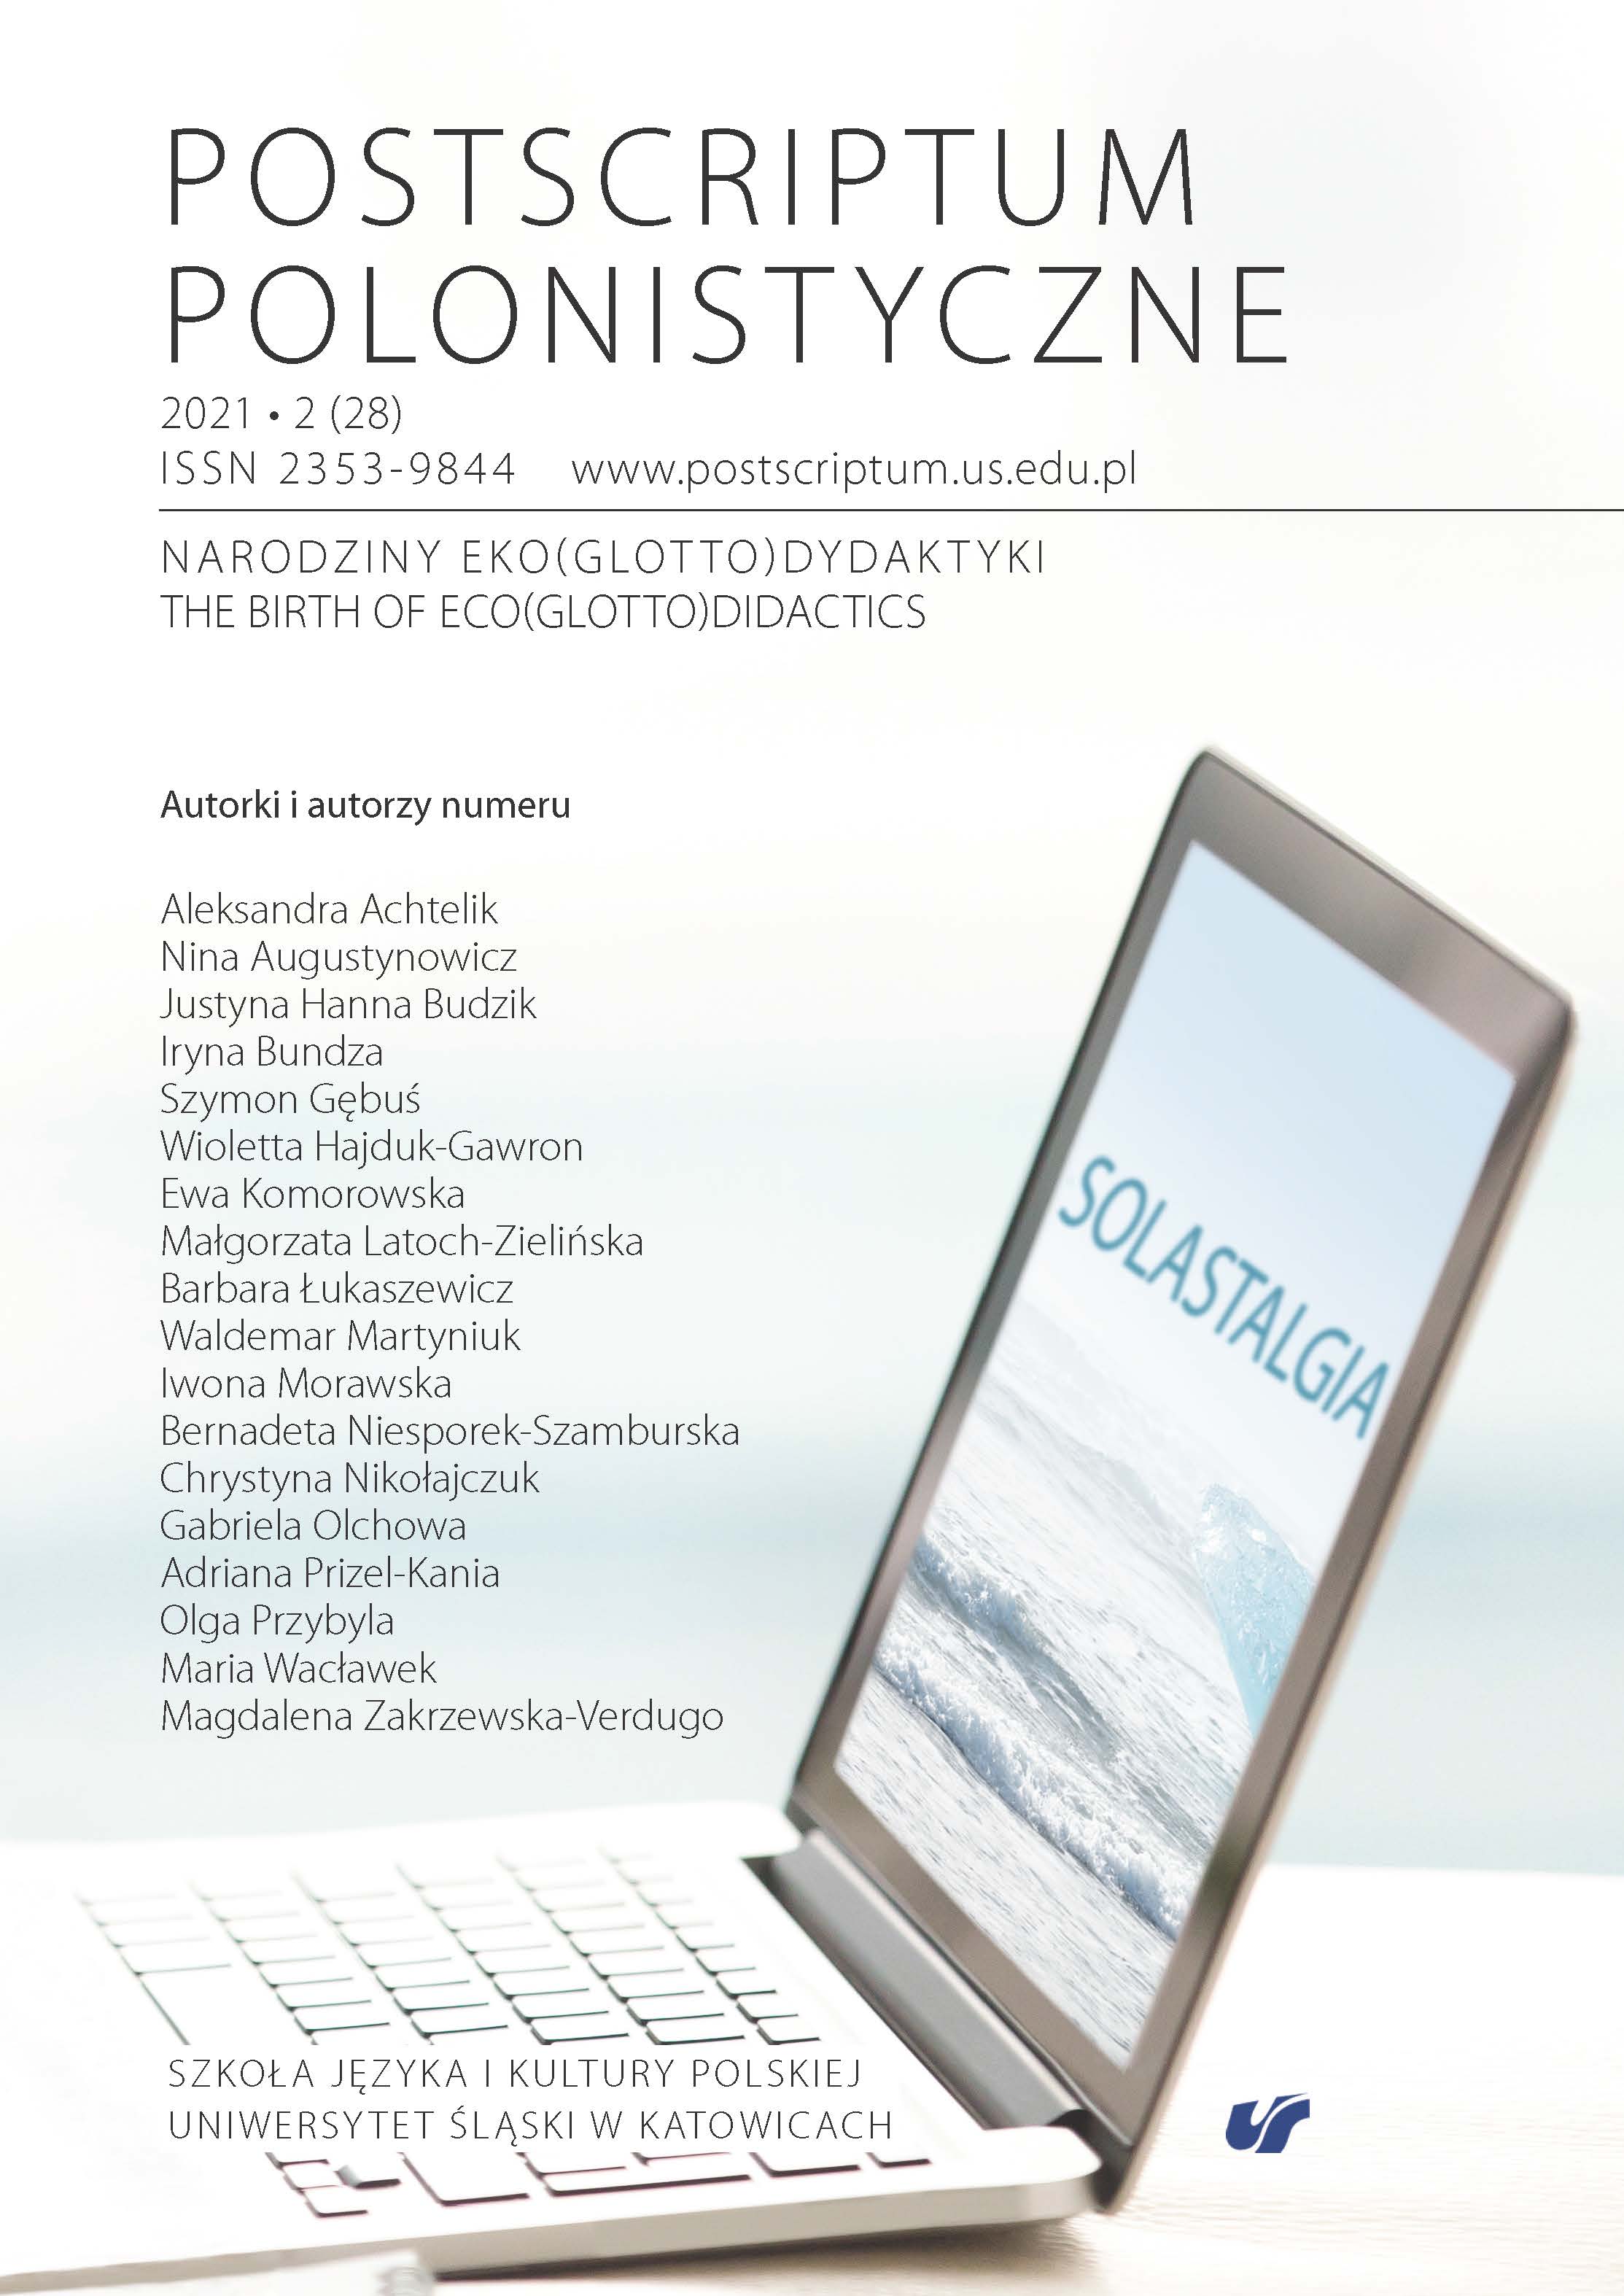 “Polish language beyond borders” during the pandemic. Description of selected communication and educational strategies Cover Image